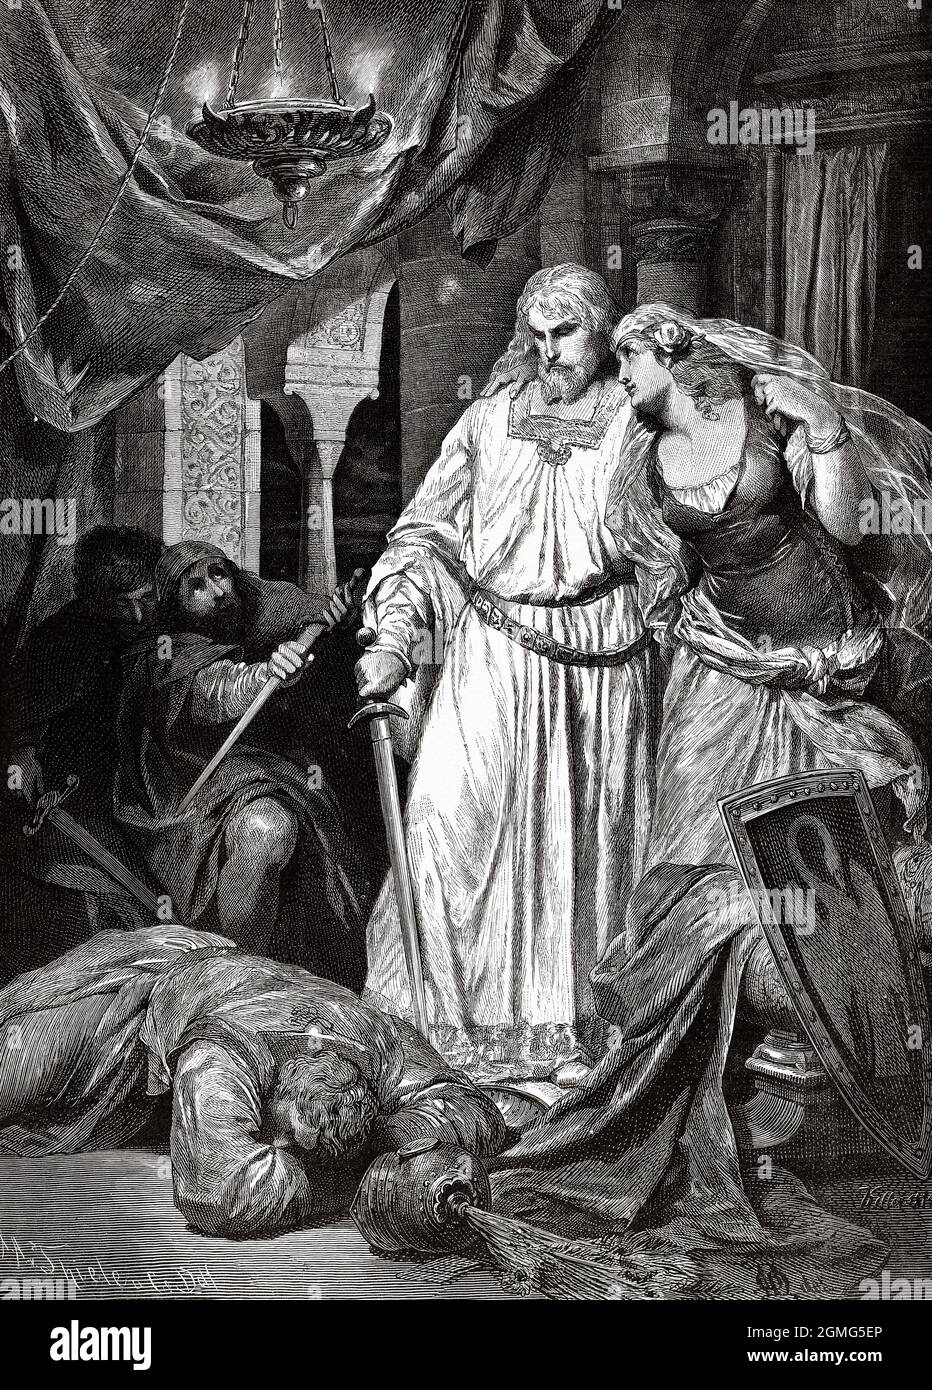 Scene from Lohengrin by Richard Wagner, painting by Ferdinand Keller (1842-1922) was a German painter, halfway between academicism and symbolism. Old 19th century engraved illustration from La Ilustración Artística 1882 Stock Photo